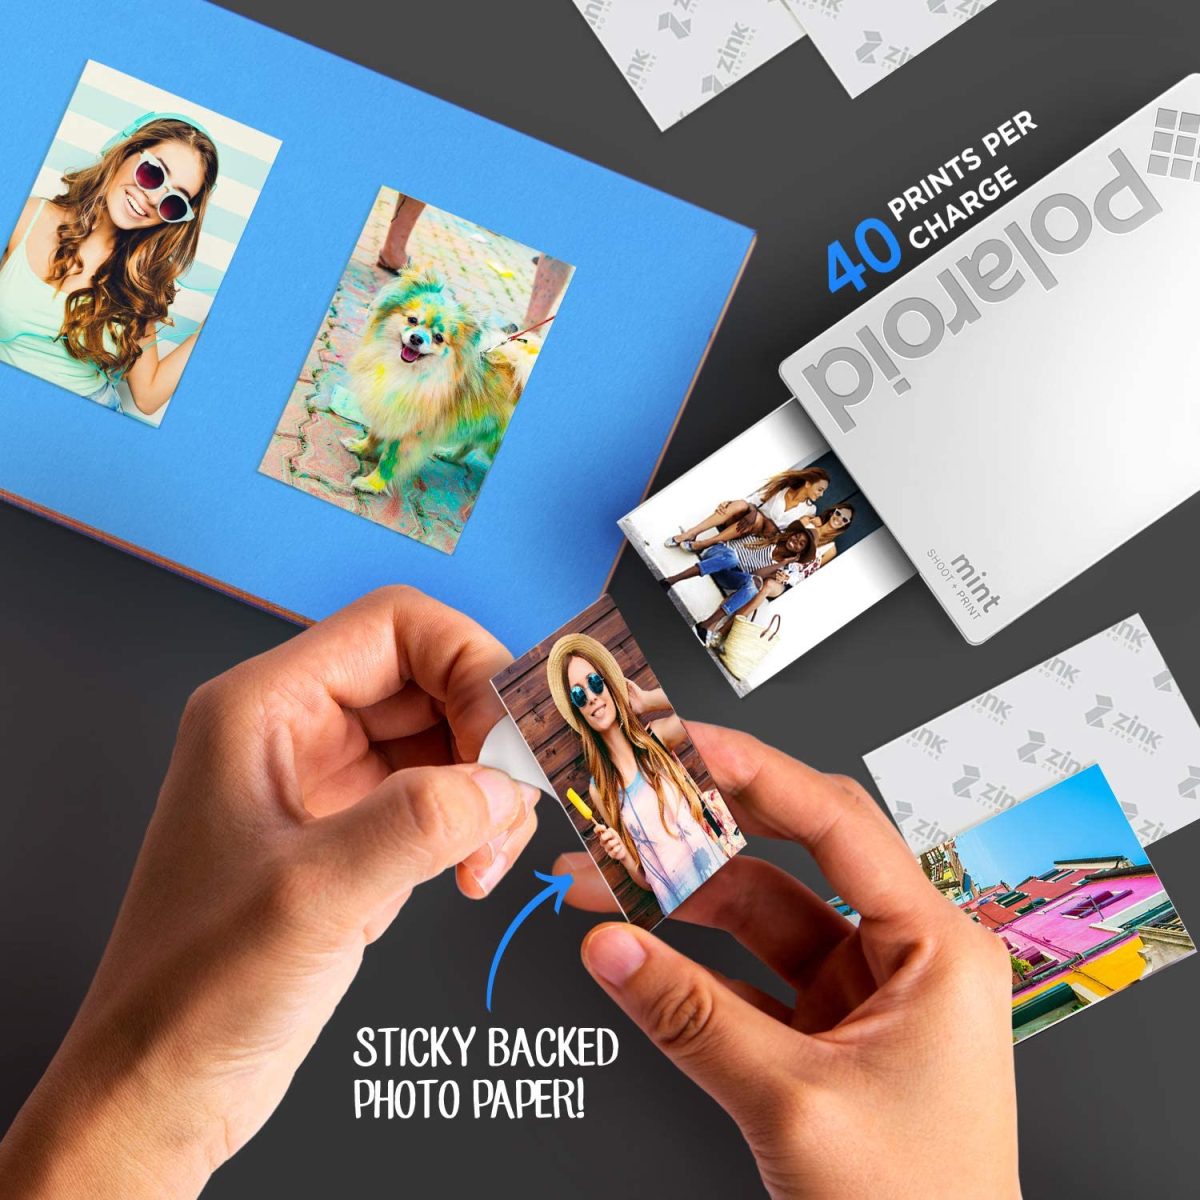 Polaroid Https://Www.youtube.com/Watch?V=Oqivlsmvng8 &Lt;Div Id=&Quot;Featurebullets_Feature_Div&Quot; Class=&Quot;Celwidget&Quot; Data-Feature-Name=&Quot;Featurebullets&Quot; Data-Cel-Widget=&Quot;Featurebullets_Feature_Div&Quot;&Gt; &Lt;Div Id=&Quot;Feature-Bullets&Quot; Class=&Quot;A-Section A-Spacing-Medium A-Spacing-Top-Small&Quot;&Gt; &Lt;Ul Class=&Quot;A-Unordered-List A-Vertical A-Spacing-Mini&Quot;&Gt; &Lt;Li&Gt;&Lt;Span Class=&Quot;A-List-Item&Quot;&Gt;Awesome Handheld Device Lets You Take 16 Megapixel Photographs &Amp; Print Instantly On 2X3 Inches Sticky Back Paper&Lt;/Span&Gt;&Lt;/Li&Gt; &Lt;Li&Gt;&Lt;Span Class=&Quot;A-List-Item&Quot;&Gt;Innovative Zero Ink Technology : There’s No Need For Pricy Toner; Zink Cartridges Combine Paper &Amp; Ink All; Packs Available In 20, 30 Or 50 Sheets&Lt;/Span&Gt;&Lt;/Li&Gt; &Lt;Li&Gt;&Lt;Span Class=&Quot;A-List-Item&Quot;&Gt;Unique Vertical Orientation : Modern Design Lets You Snap Upright, Just Like A Smartphone&Lt;/Span&Gt;&Lt;/Li&Gt; &Lt;Li&Gt;&Lt;Span Class=&Quot;A-List-Item&Quot;&Gt;A Mode For Every Mood : Simple Operation &Amp; Design Includes [6] Easy Picture Settings; Choose From Vibrant Color, Black &Amp; White Or Vintage Effect&Lt;/Span&Gt;&Lt;/Li&Gt; &Lt;Li&Gt;&Lt;Span Class=&Quot;A-List-Item&Quot;&Gt;Fashion Forward &Amp; Travel Friendly : Pick From [5] Fabulously Vibrant Colors; Pocket Sized Camera Measures 4. 6 X 3. 1 X 0. 8 Inches &Amp; Weighs Only 6 Ounces&Lt;/Span&Gt;&Lt;/Li&Gt; &Lt;Li&Gt;&Lt;Span Class=&Quot;A-List-Item&Quot;&Gt;Viewfinder Type: Optical&Lt;/Span&Gt;&Lt;/Li&Gt; &Lt;/Ul&Gt; &Lt;/Div&Gt; &Lt;/Div&Gt; Polaroid Mint Instant Print Digital Camera Polaroid Mint Instant Print Digital Camera - Blue